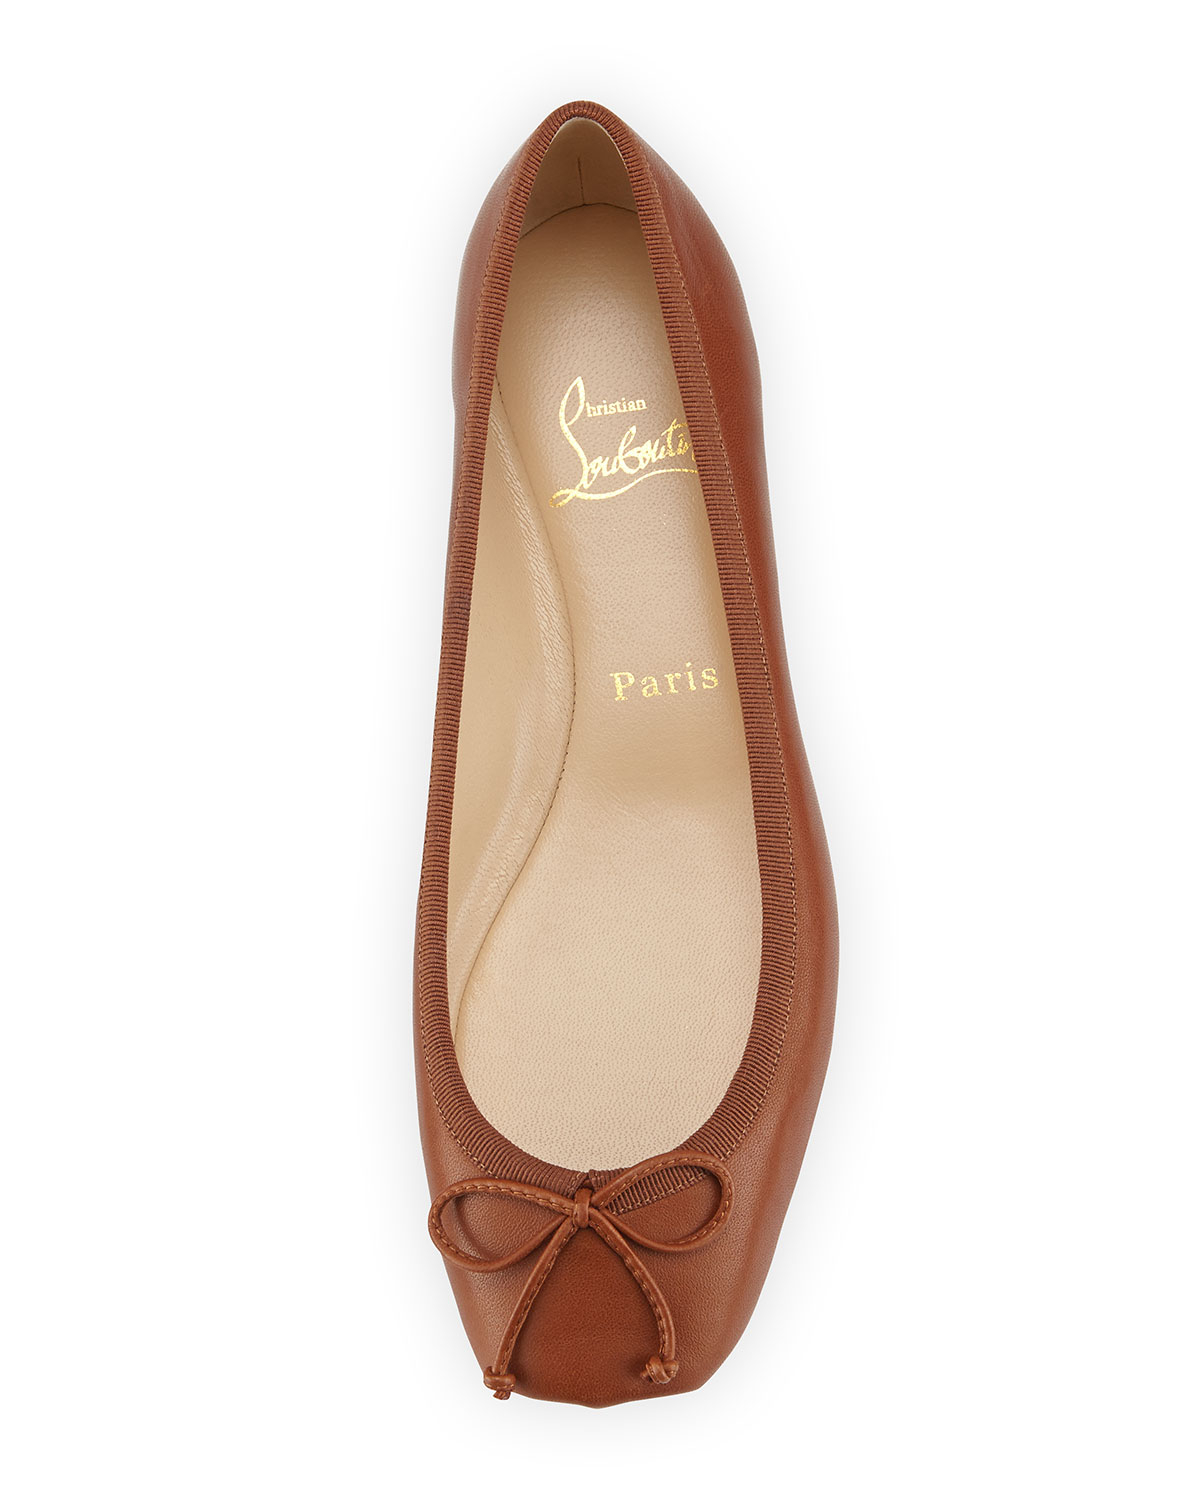 Christian louboutin Rosella Napa Leather Ballet Flat in Brown | Lyst  